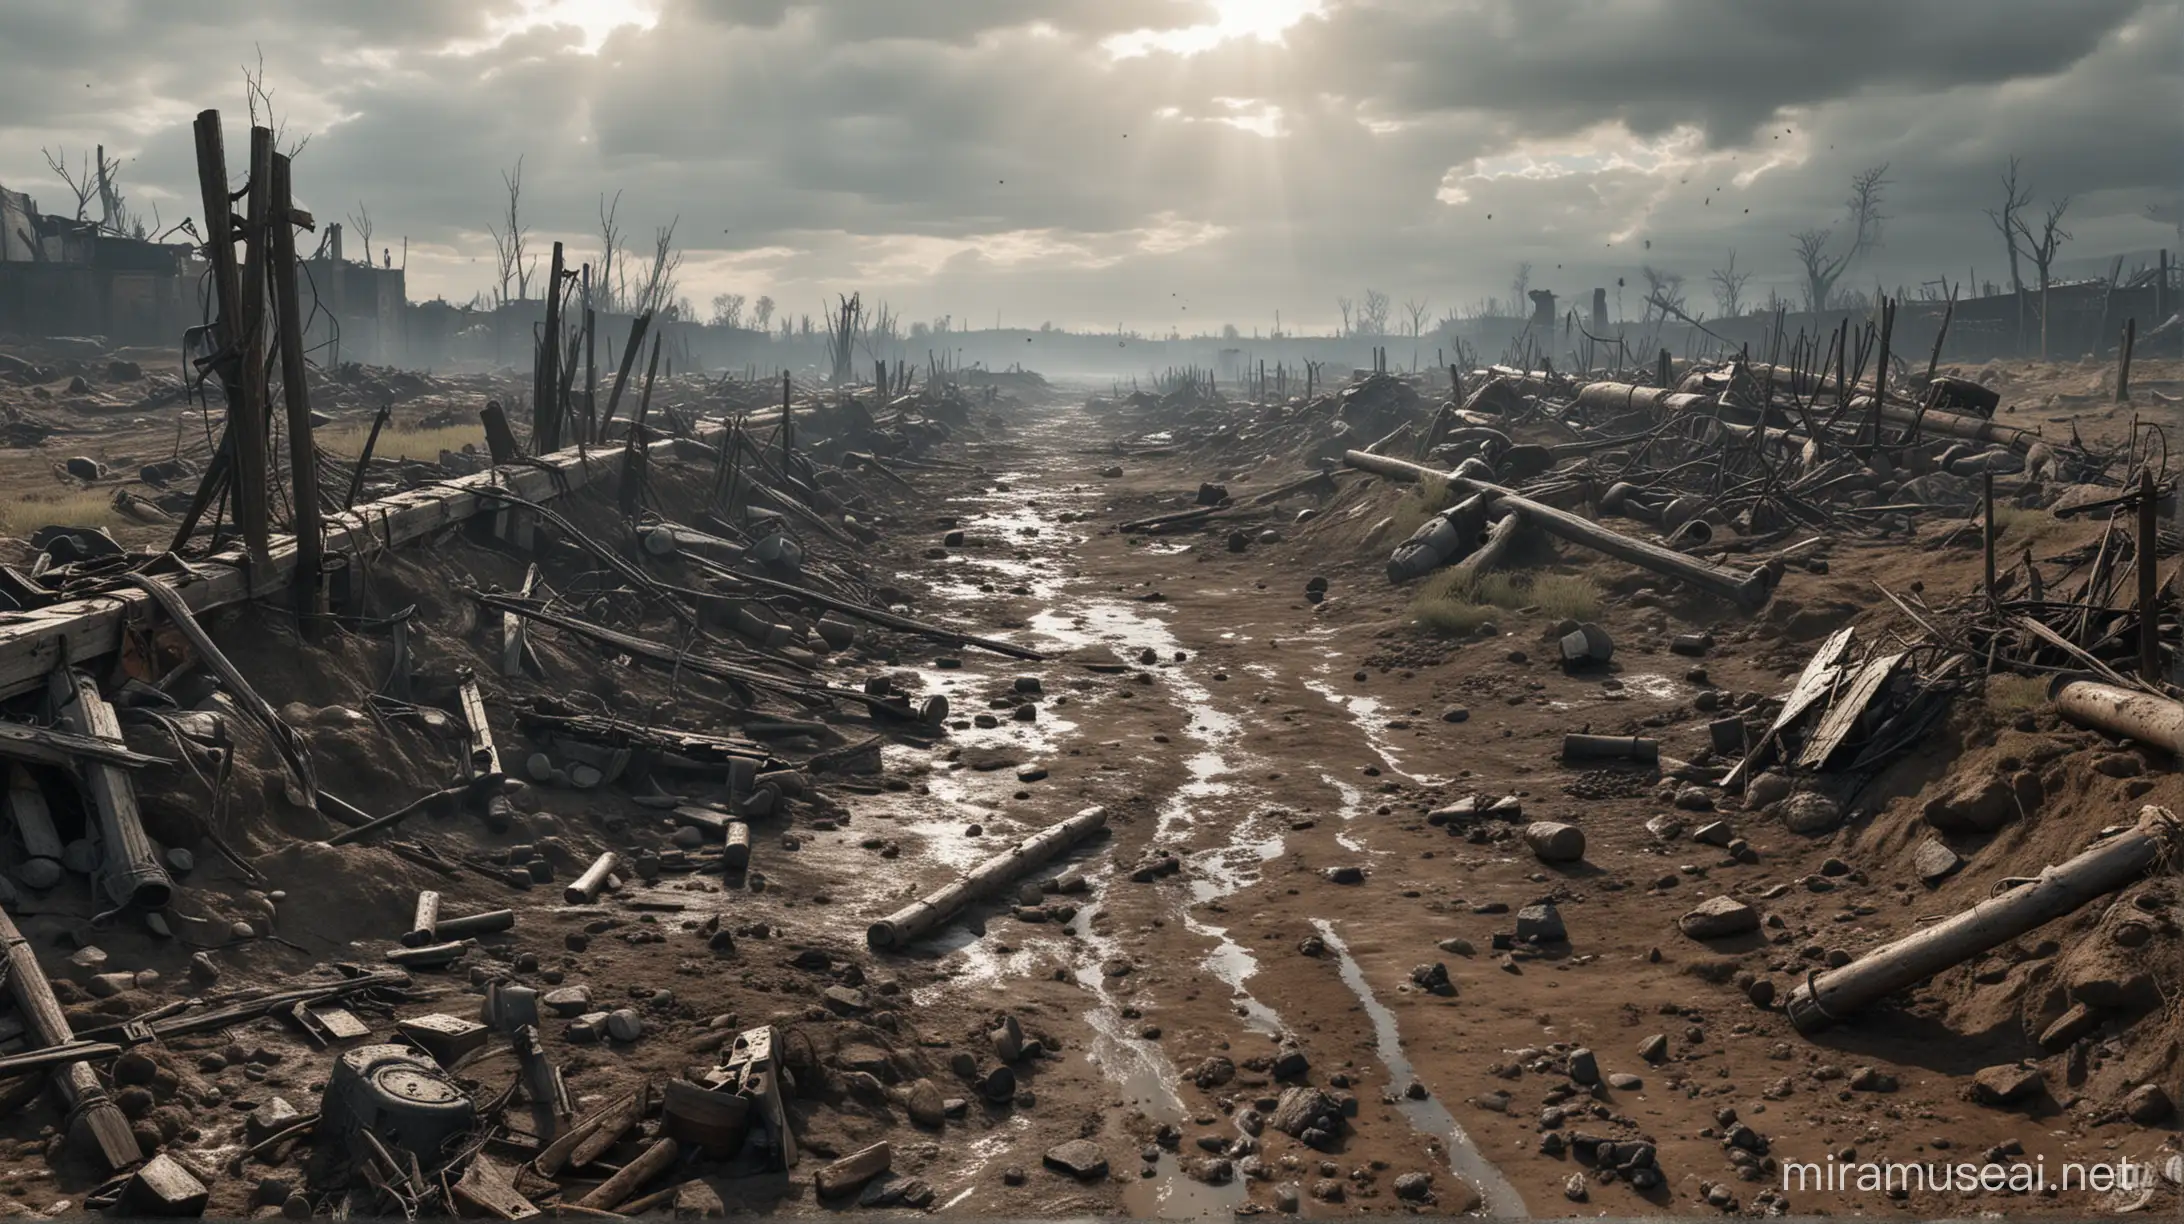 Generate a 8K hyperrealistic image depicting the horrific battlefields of the First World War, with Unreal Engine v5 rendering capturing the devastation and chaos of the scene. Ensure the 3D rendering is highly detailed, showcasing the muddy trenches, barbed wire entanglements, and shell craters littering the landscape. Utilize HDR lighting to enhance the grim atmosphere, with photorealistic textures conveying the brutality of warfare. Incorporate high-resolution elements of soldiers, equipment, and artillery strewn across the battlefield to add authenticity to the scene. The image should evoke a sense of despair and tragedy as it portrays the harsh realities of war